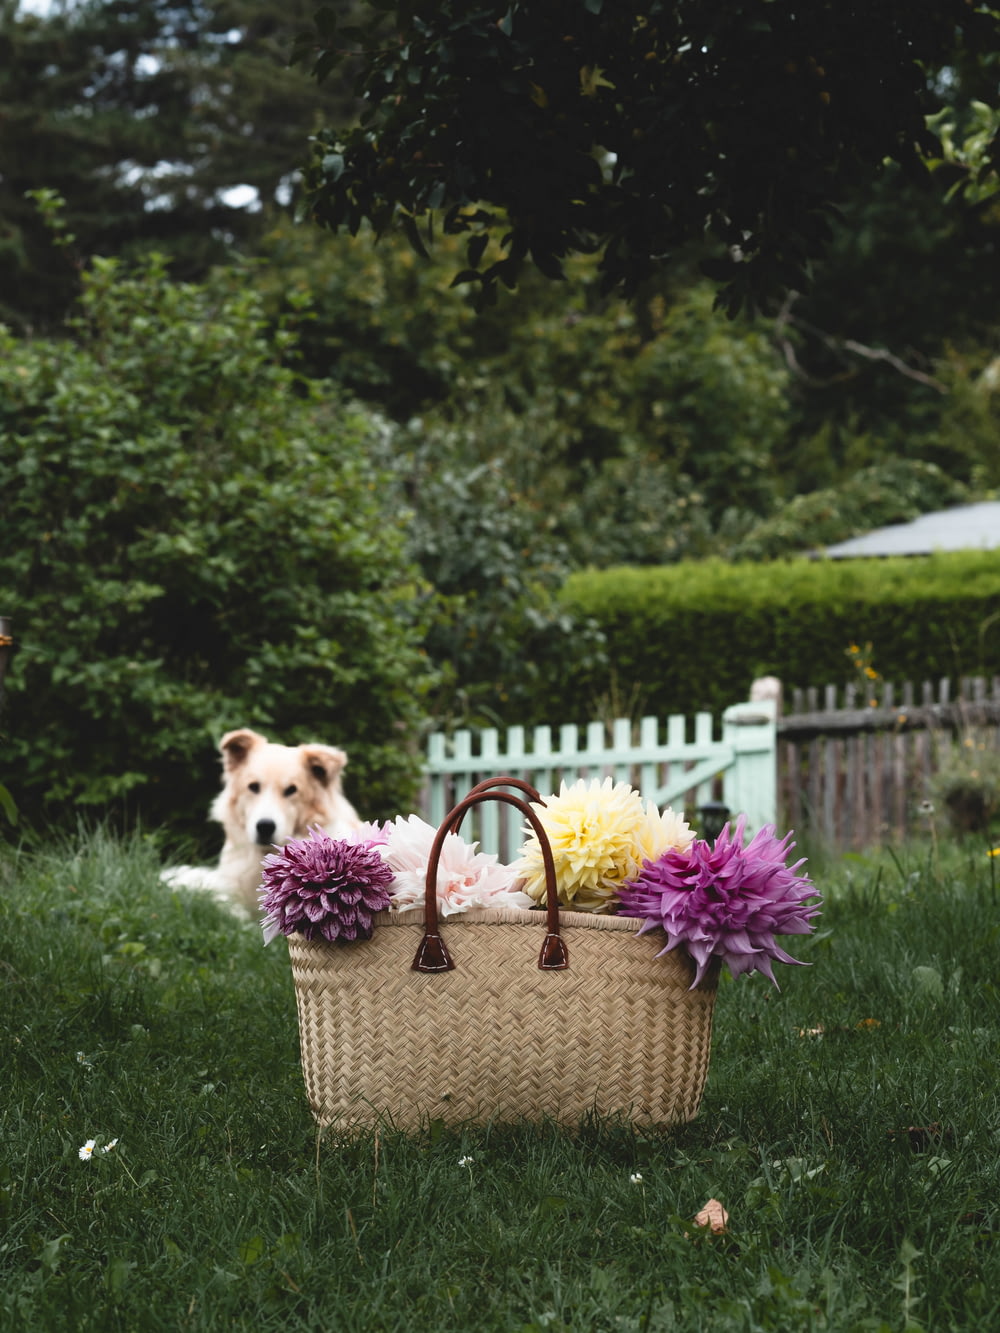 a dog sitting in the grass next to a basket with flowers